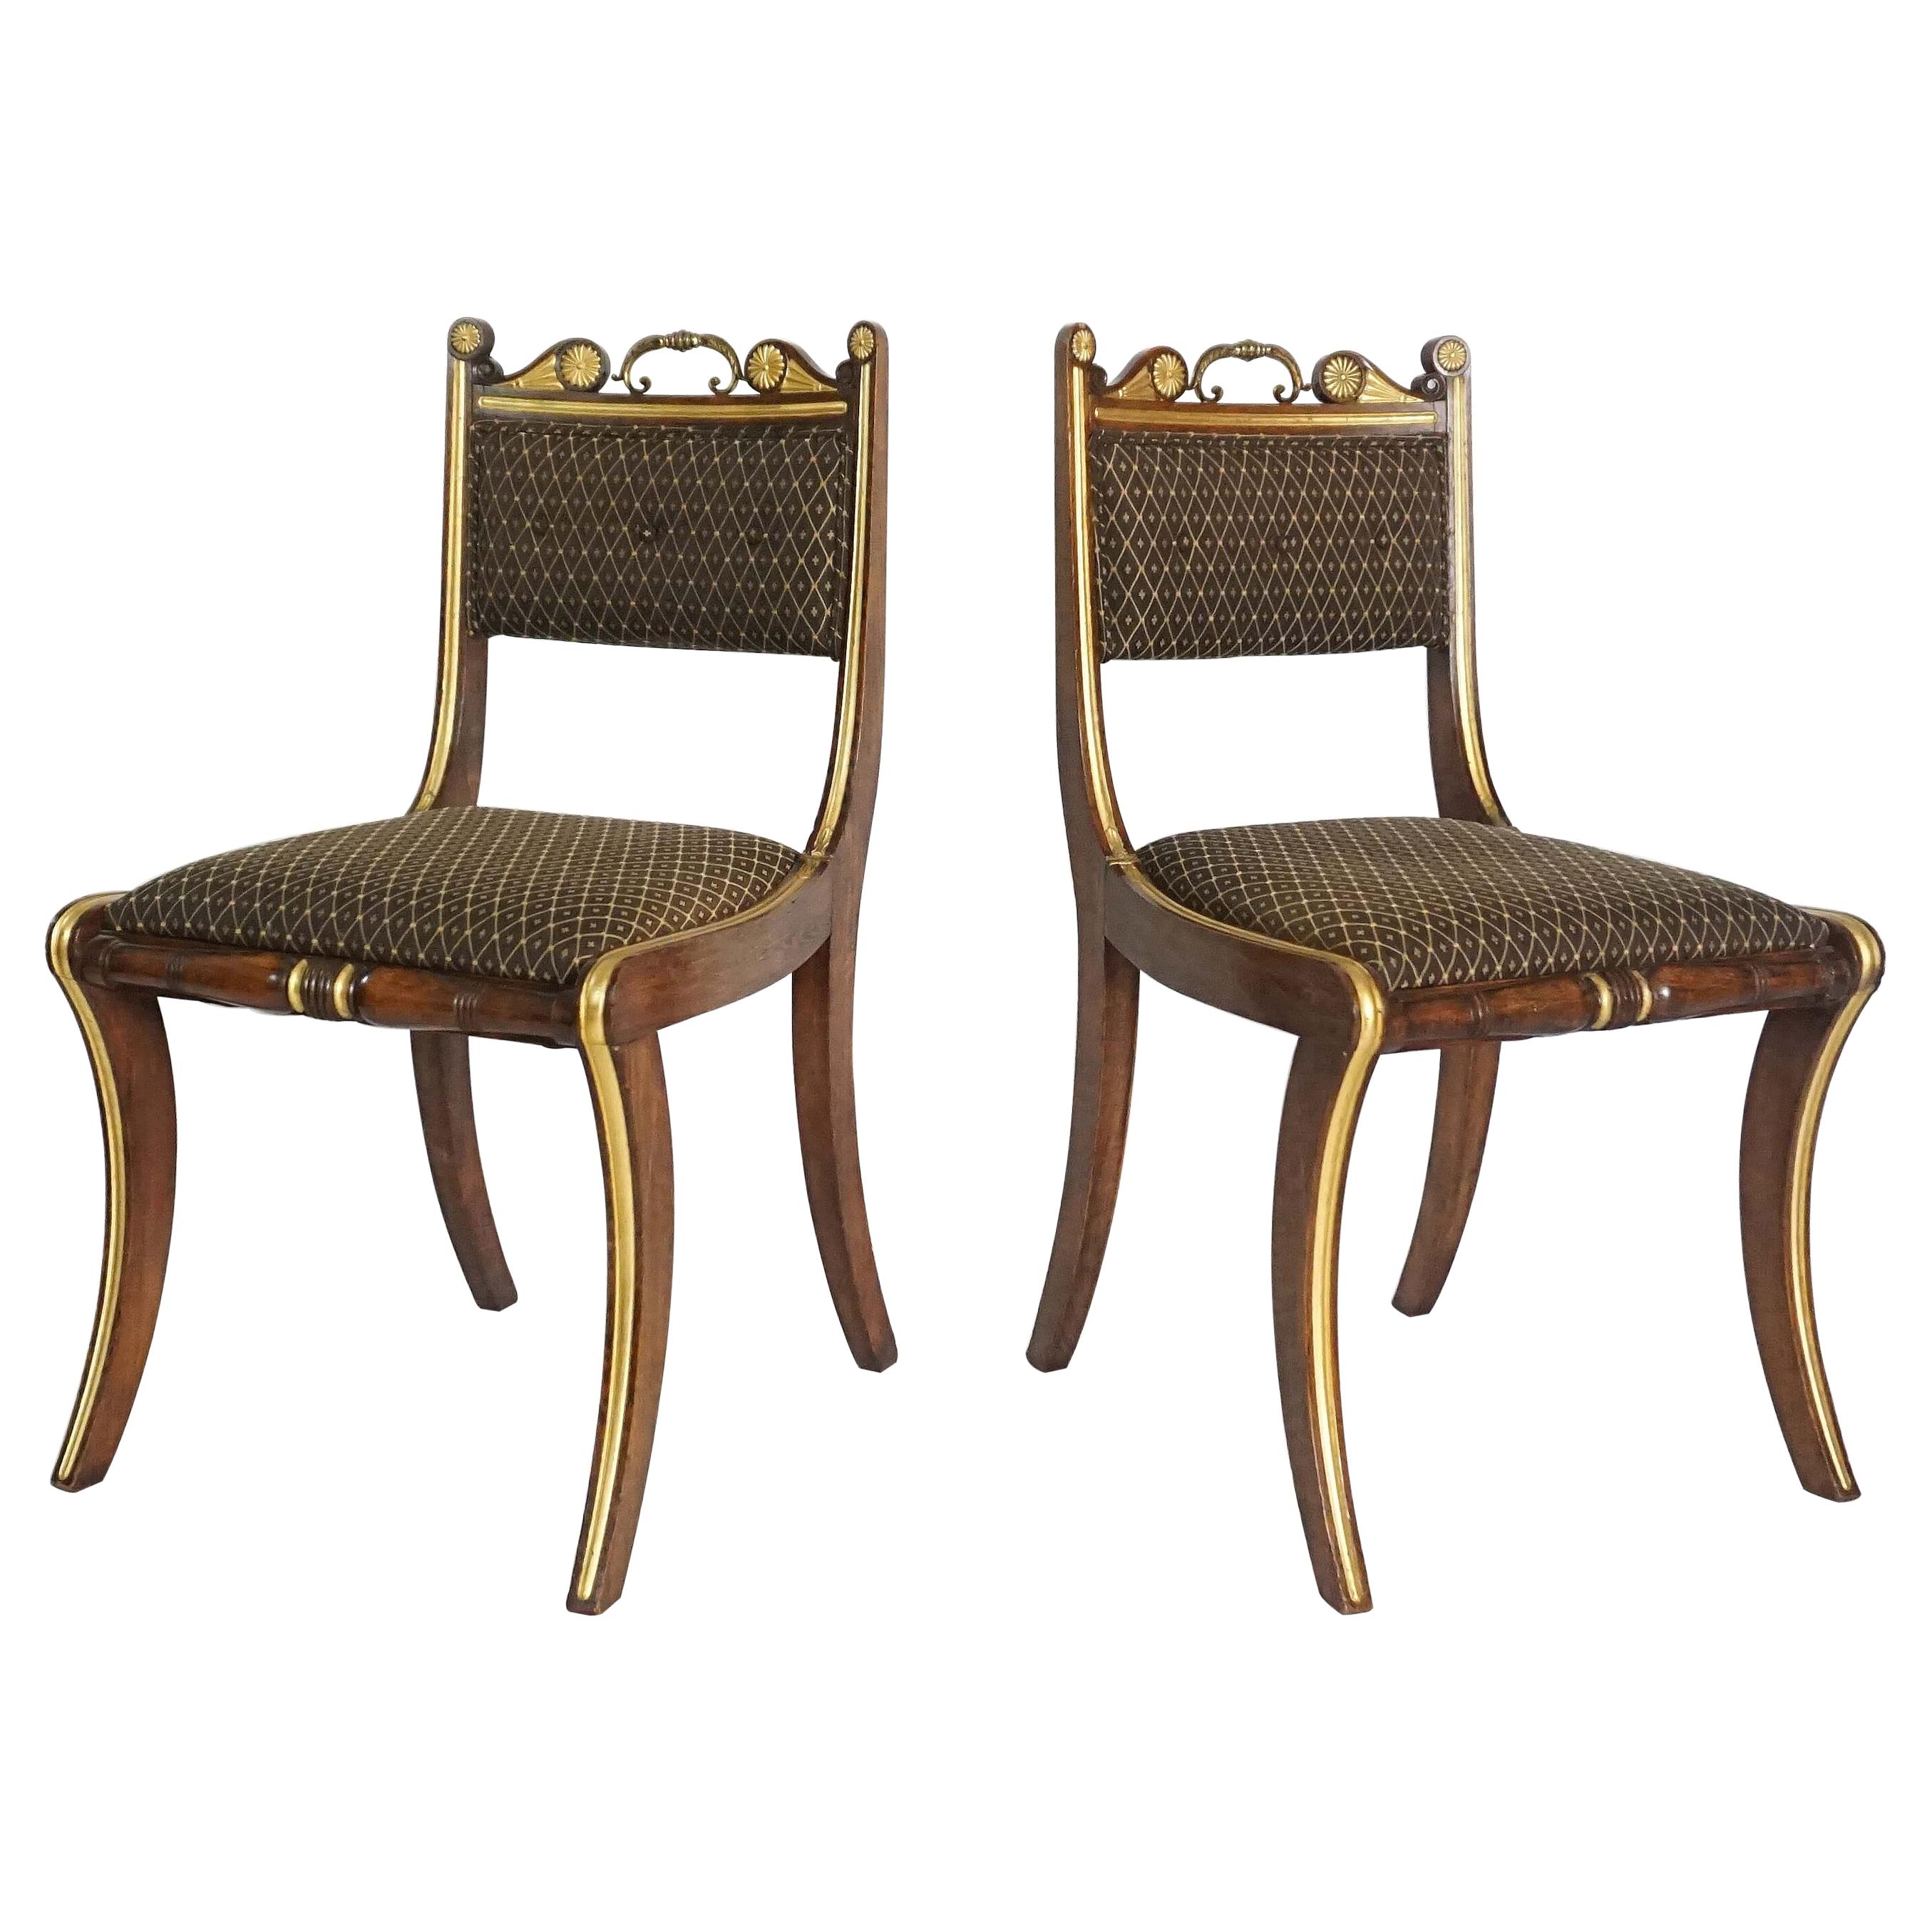 Pair of English Regency Side Chairs attributed to Morel & Hughes, circa 1815 For Sale